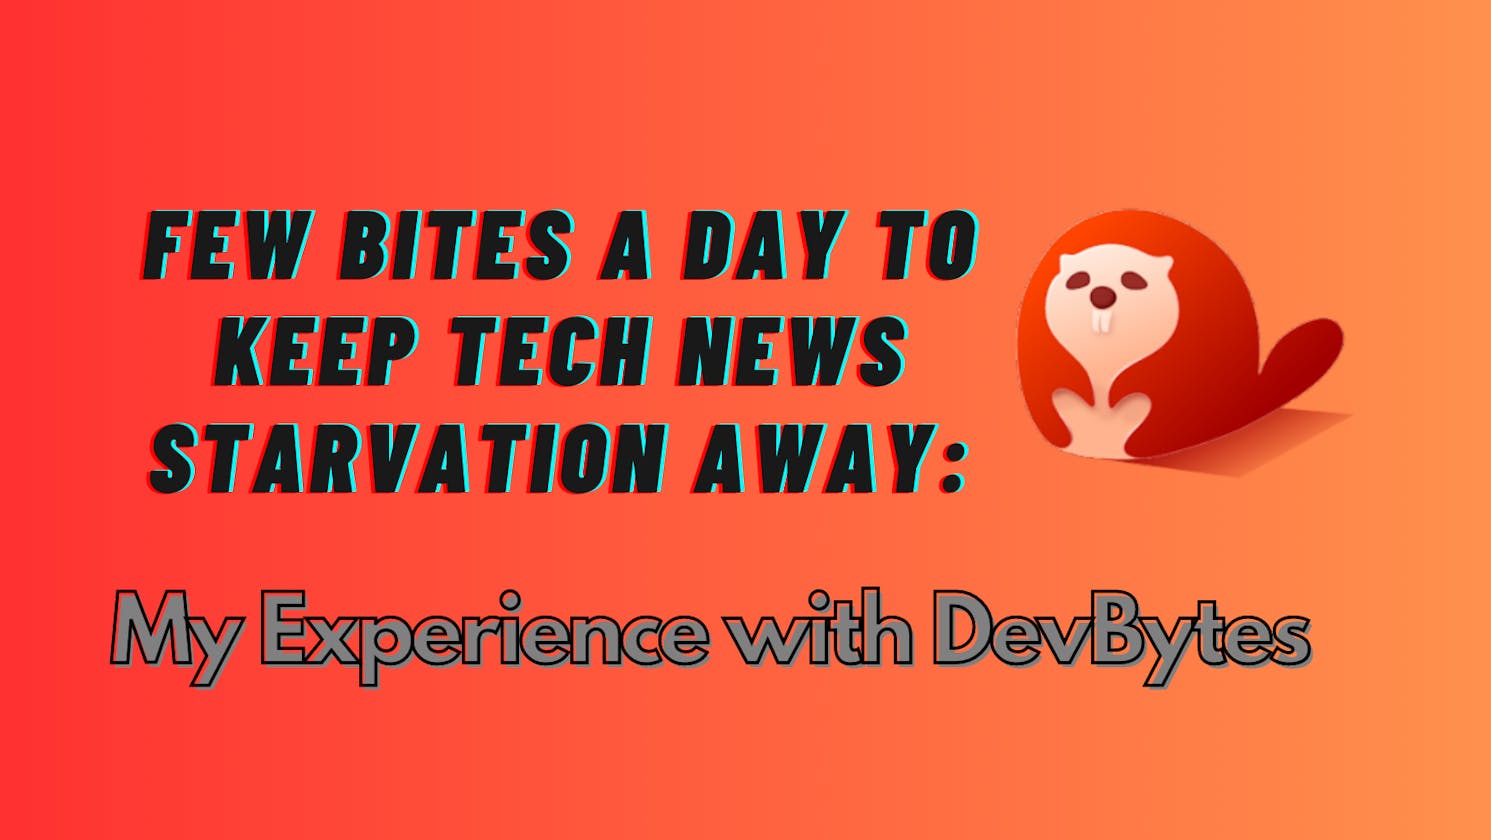 Few Bites a day to keep Tech News starvation away: My Experience with DevBytes